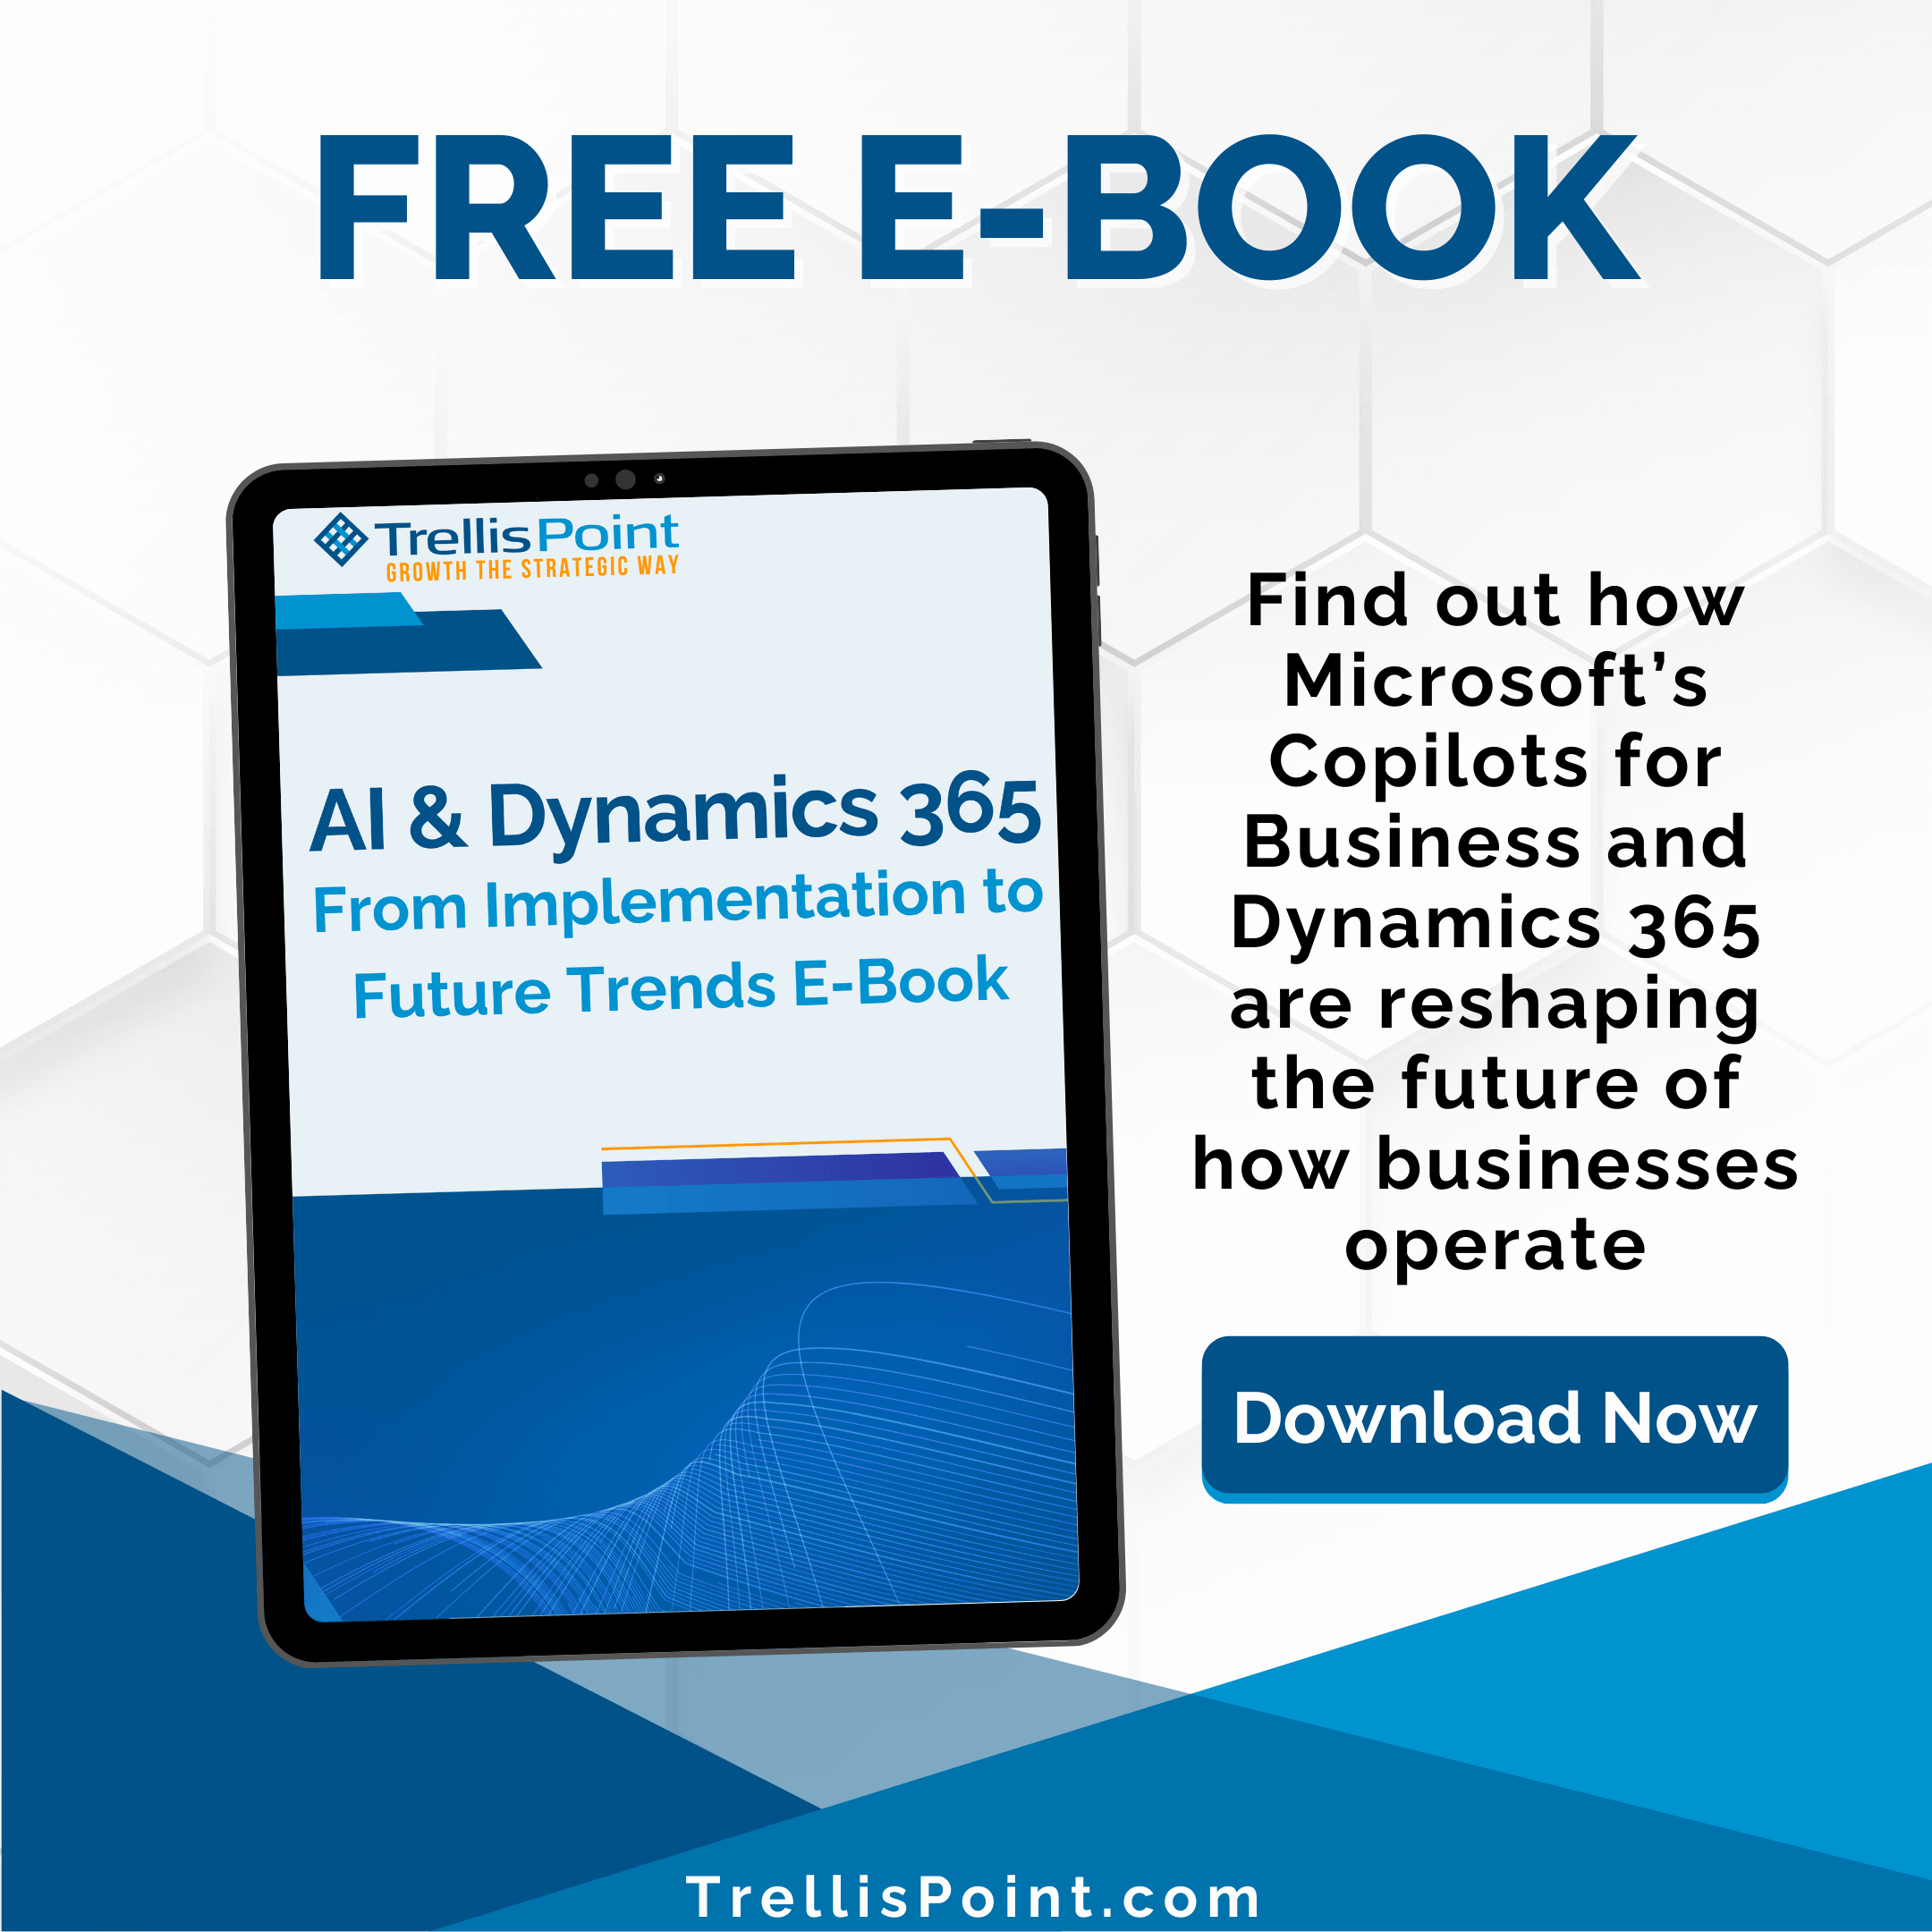 AI & Dynamics 365 From Implementation to Future Trends E-Book